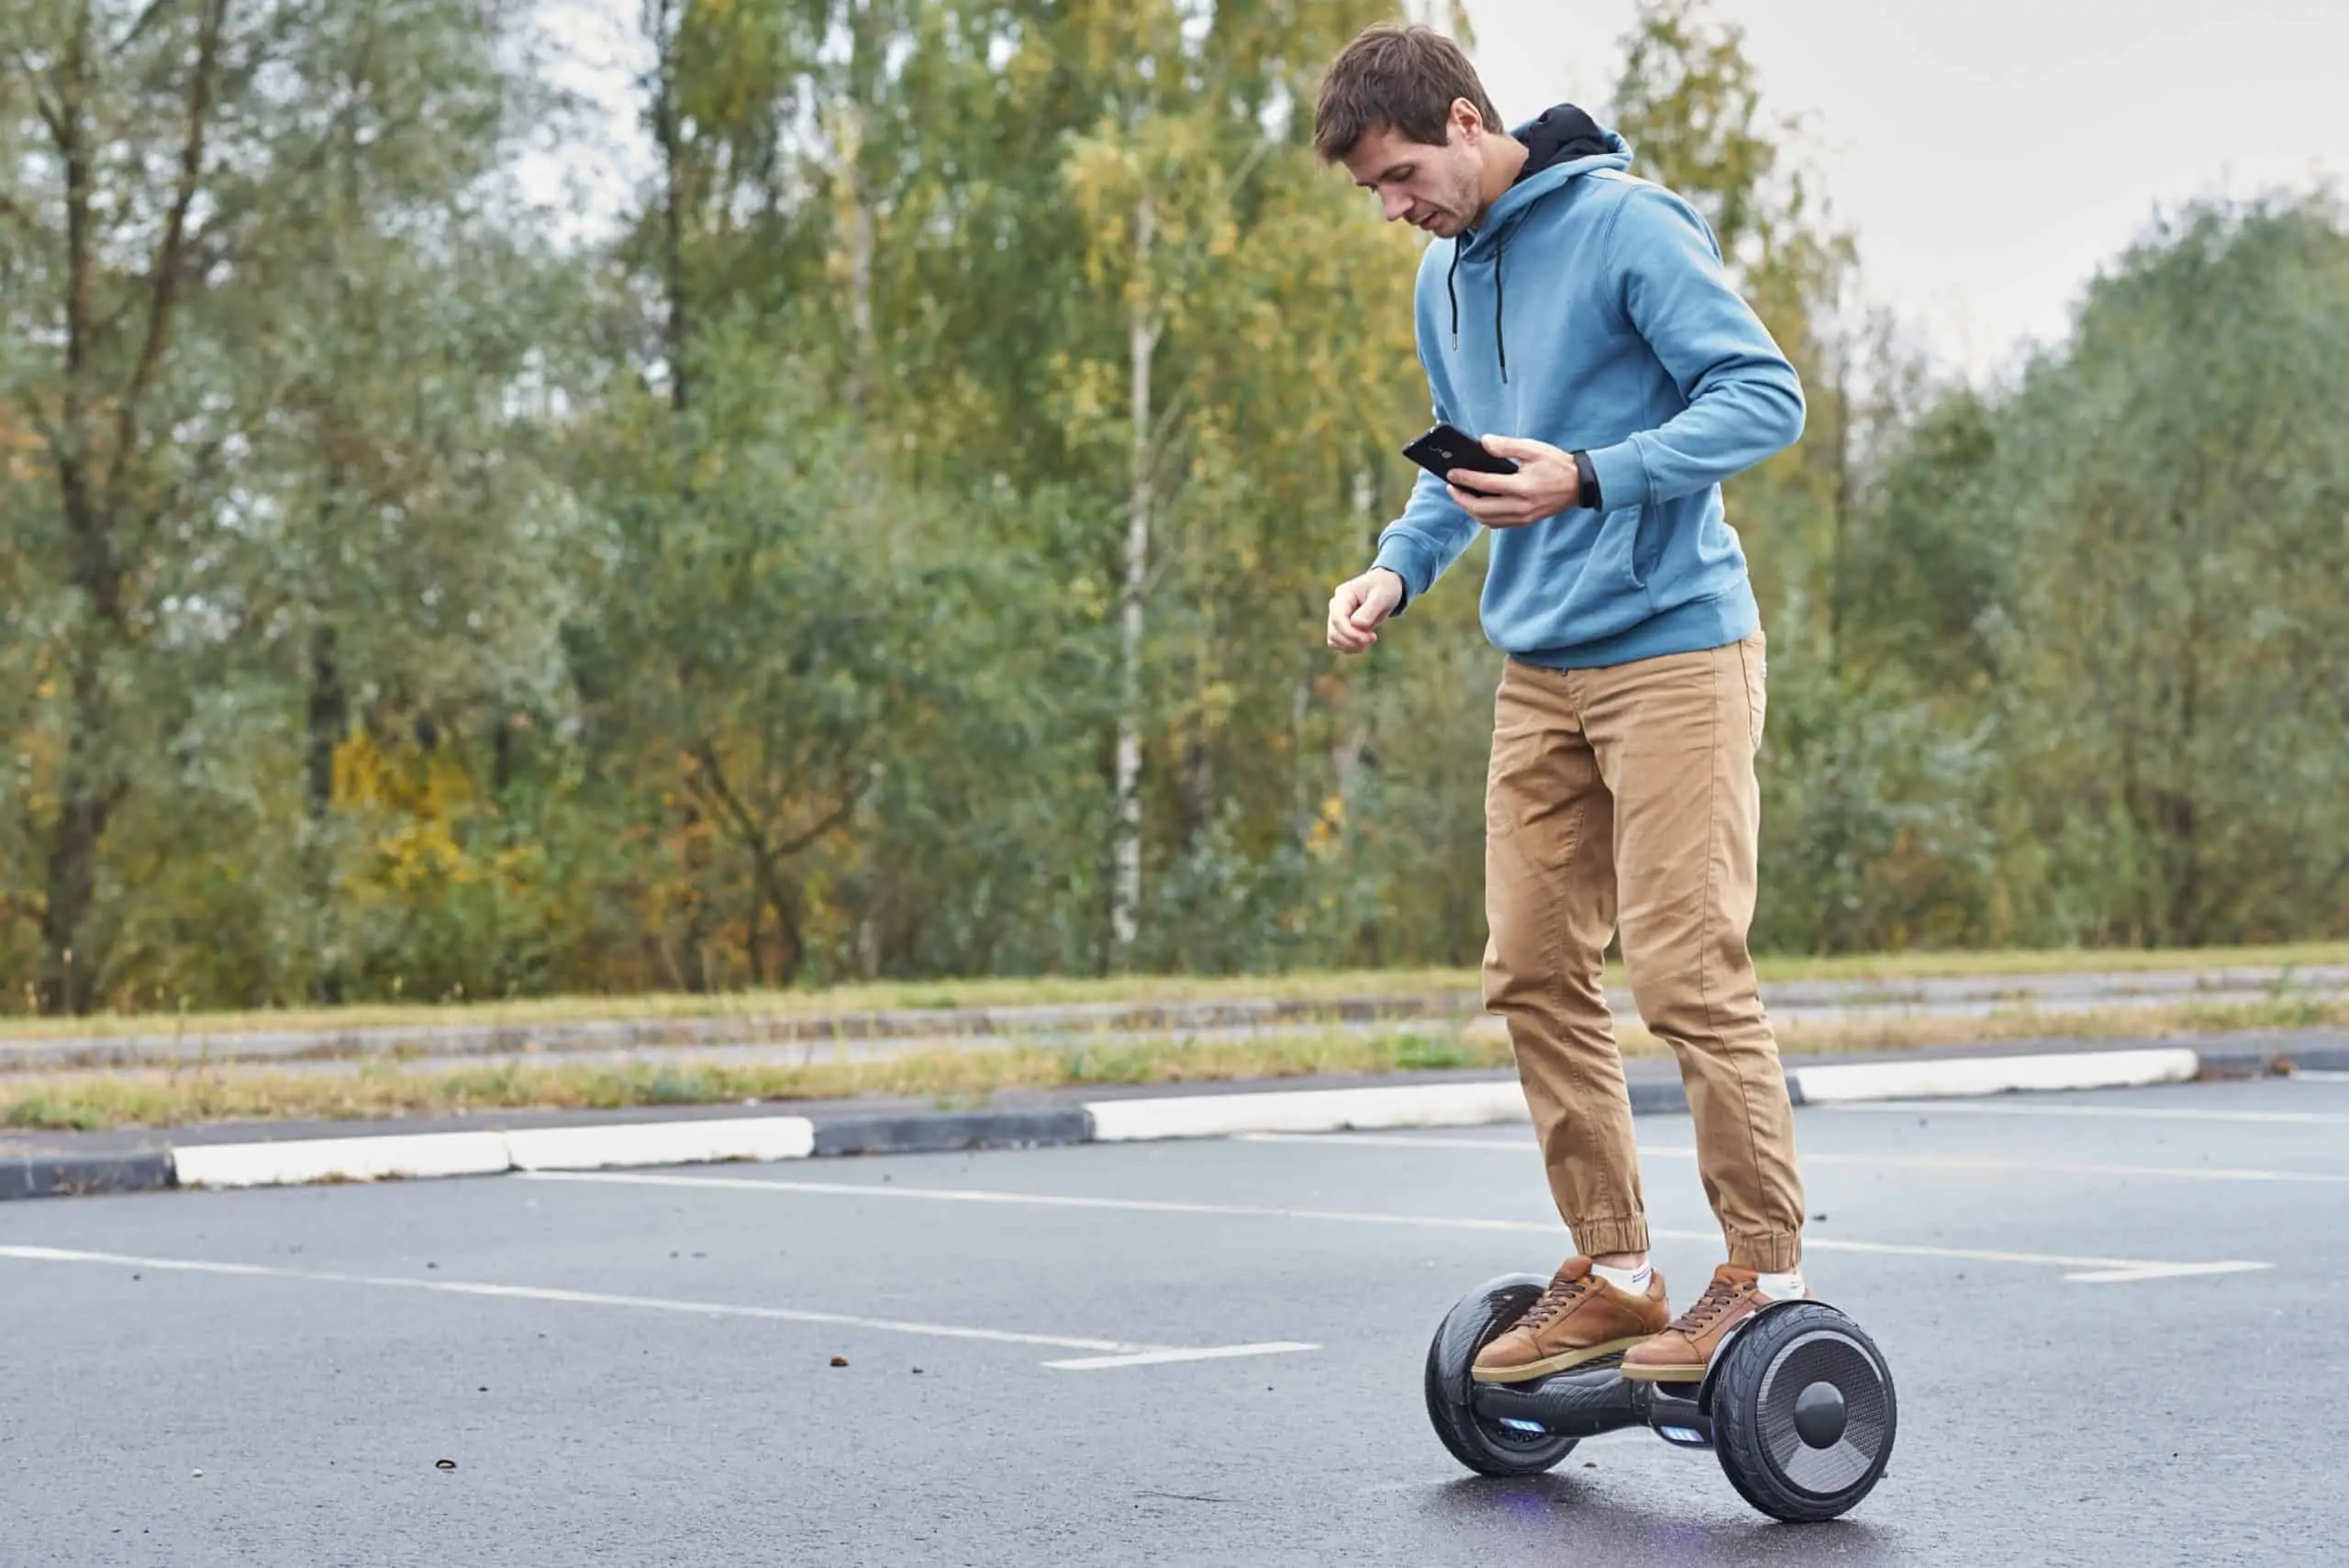 How Long Does It Take to Charge a Hoverboard? Expectations Vs. Reality 2